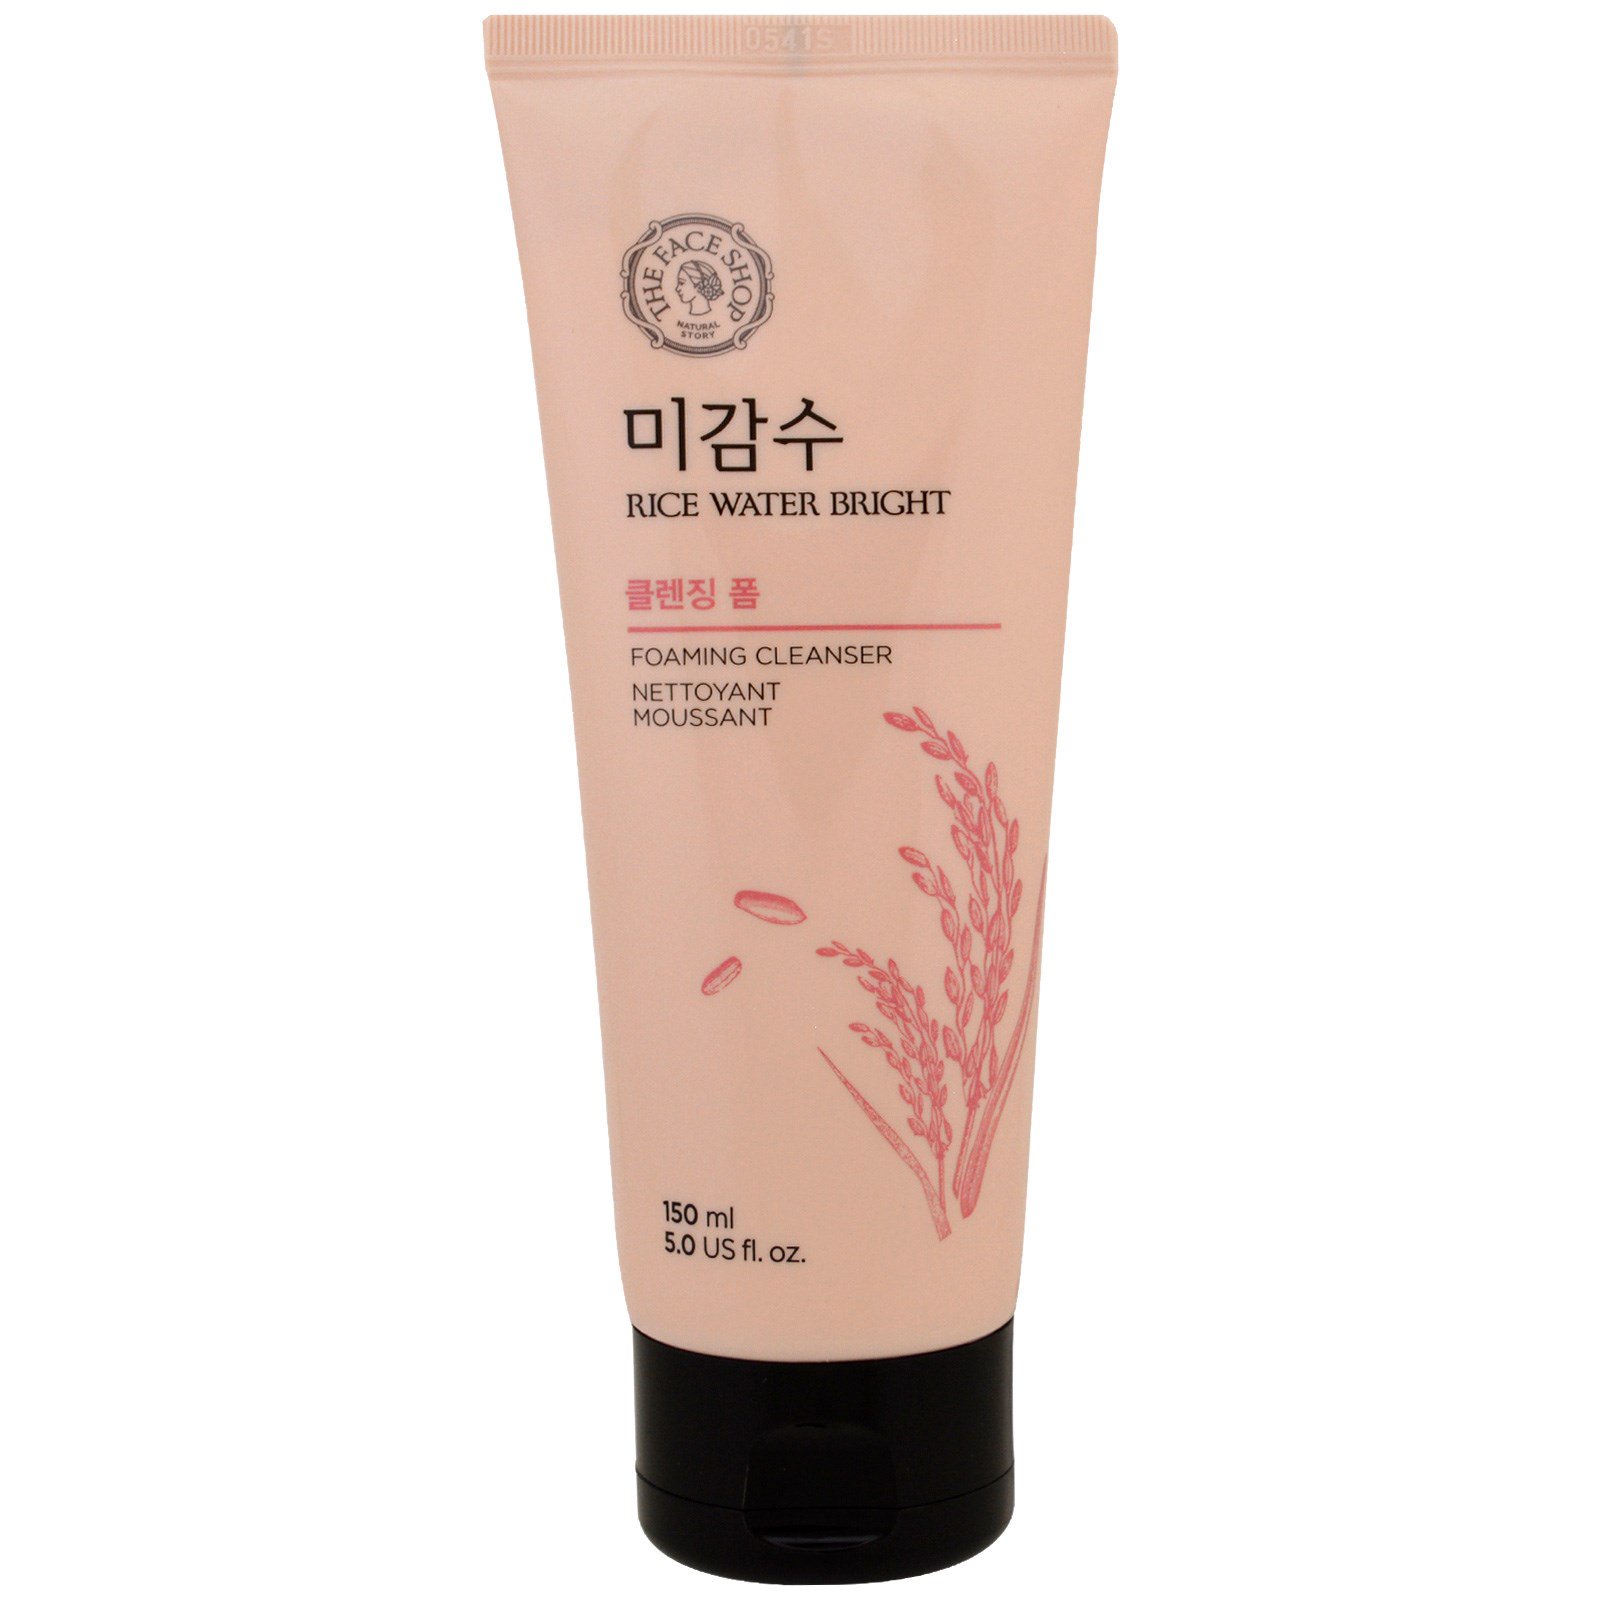 The Face Shop, Rice Water Bright, Foaming Cleanser, 5.0 fl ...